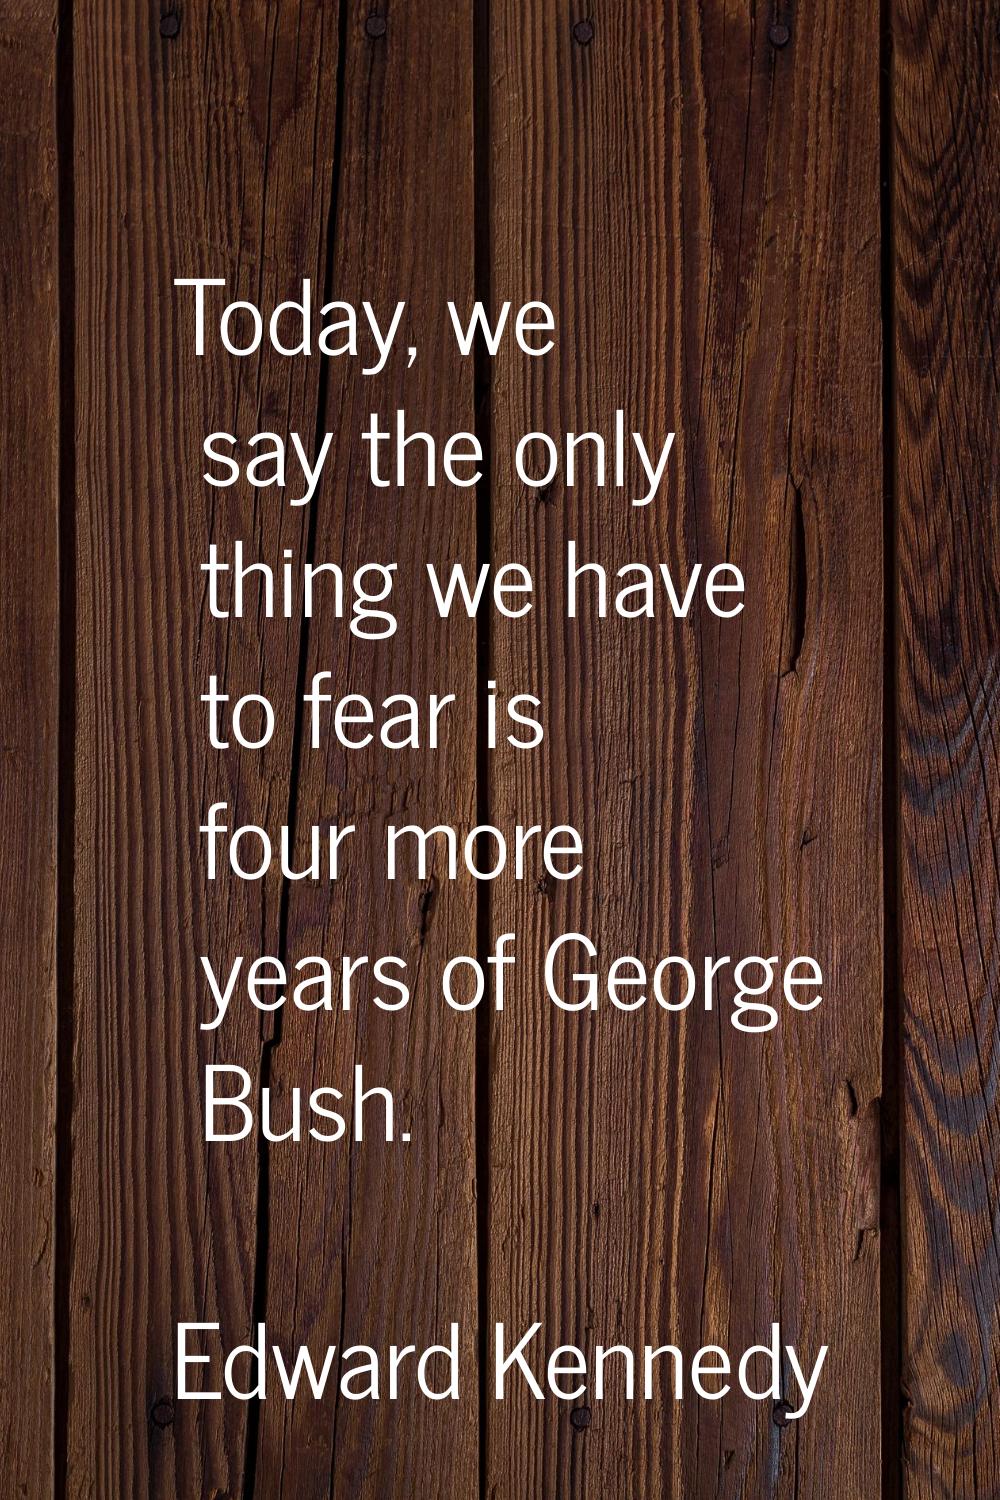 Today, we say the only thing we have to fear is four more years of George Bush.